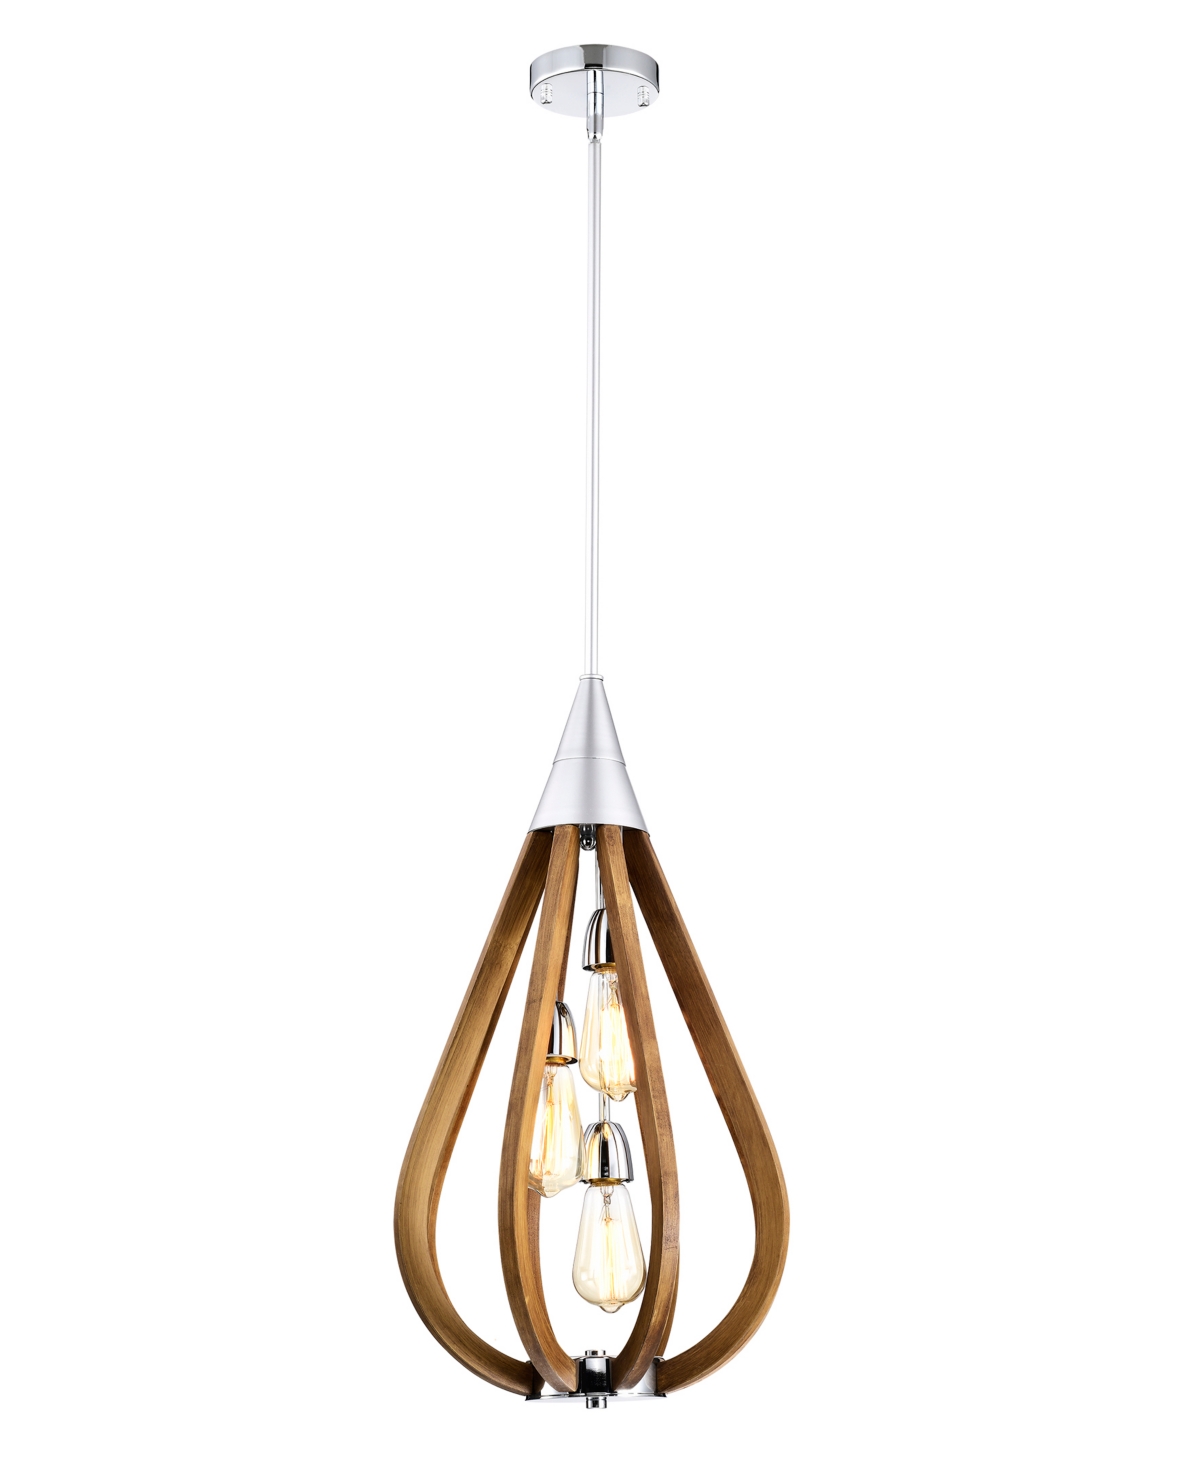 Home Accessories Flann 14" 3-light Indoor Pendant With Light Kit In Silver And Faux Wood Grain